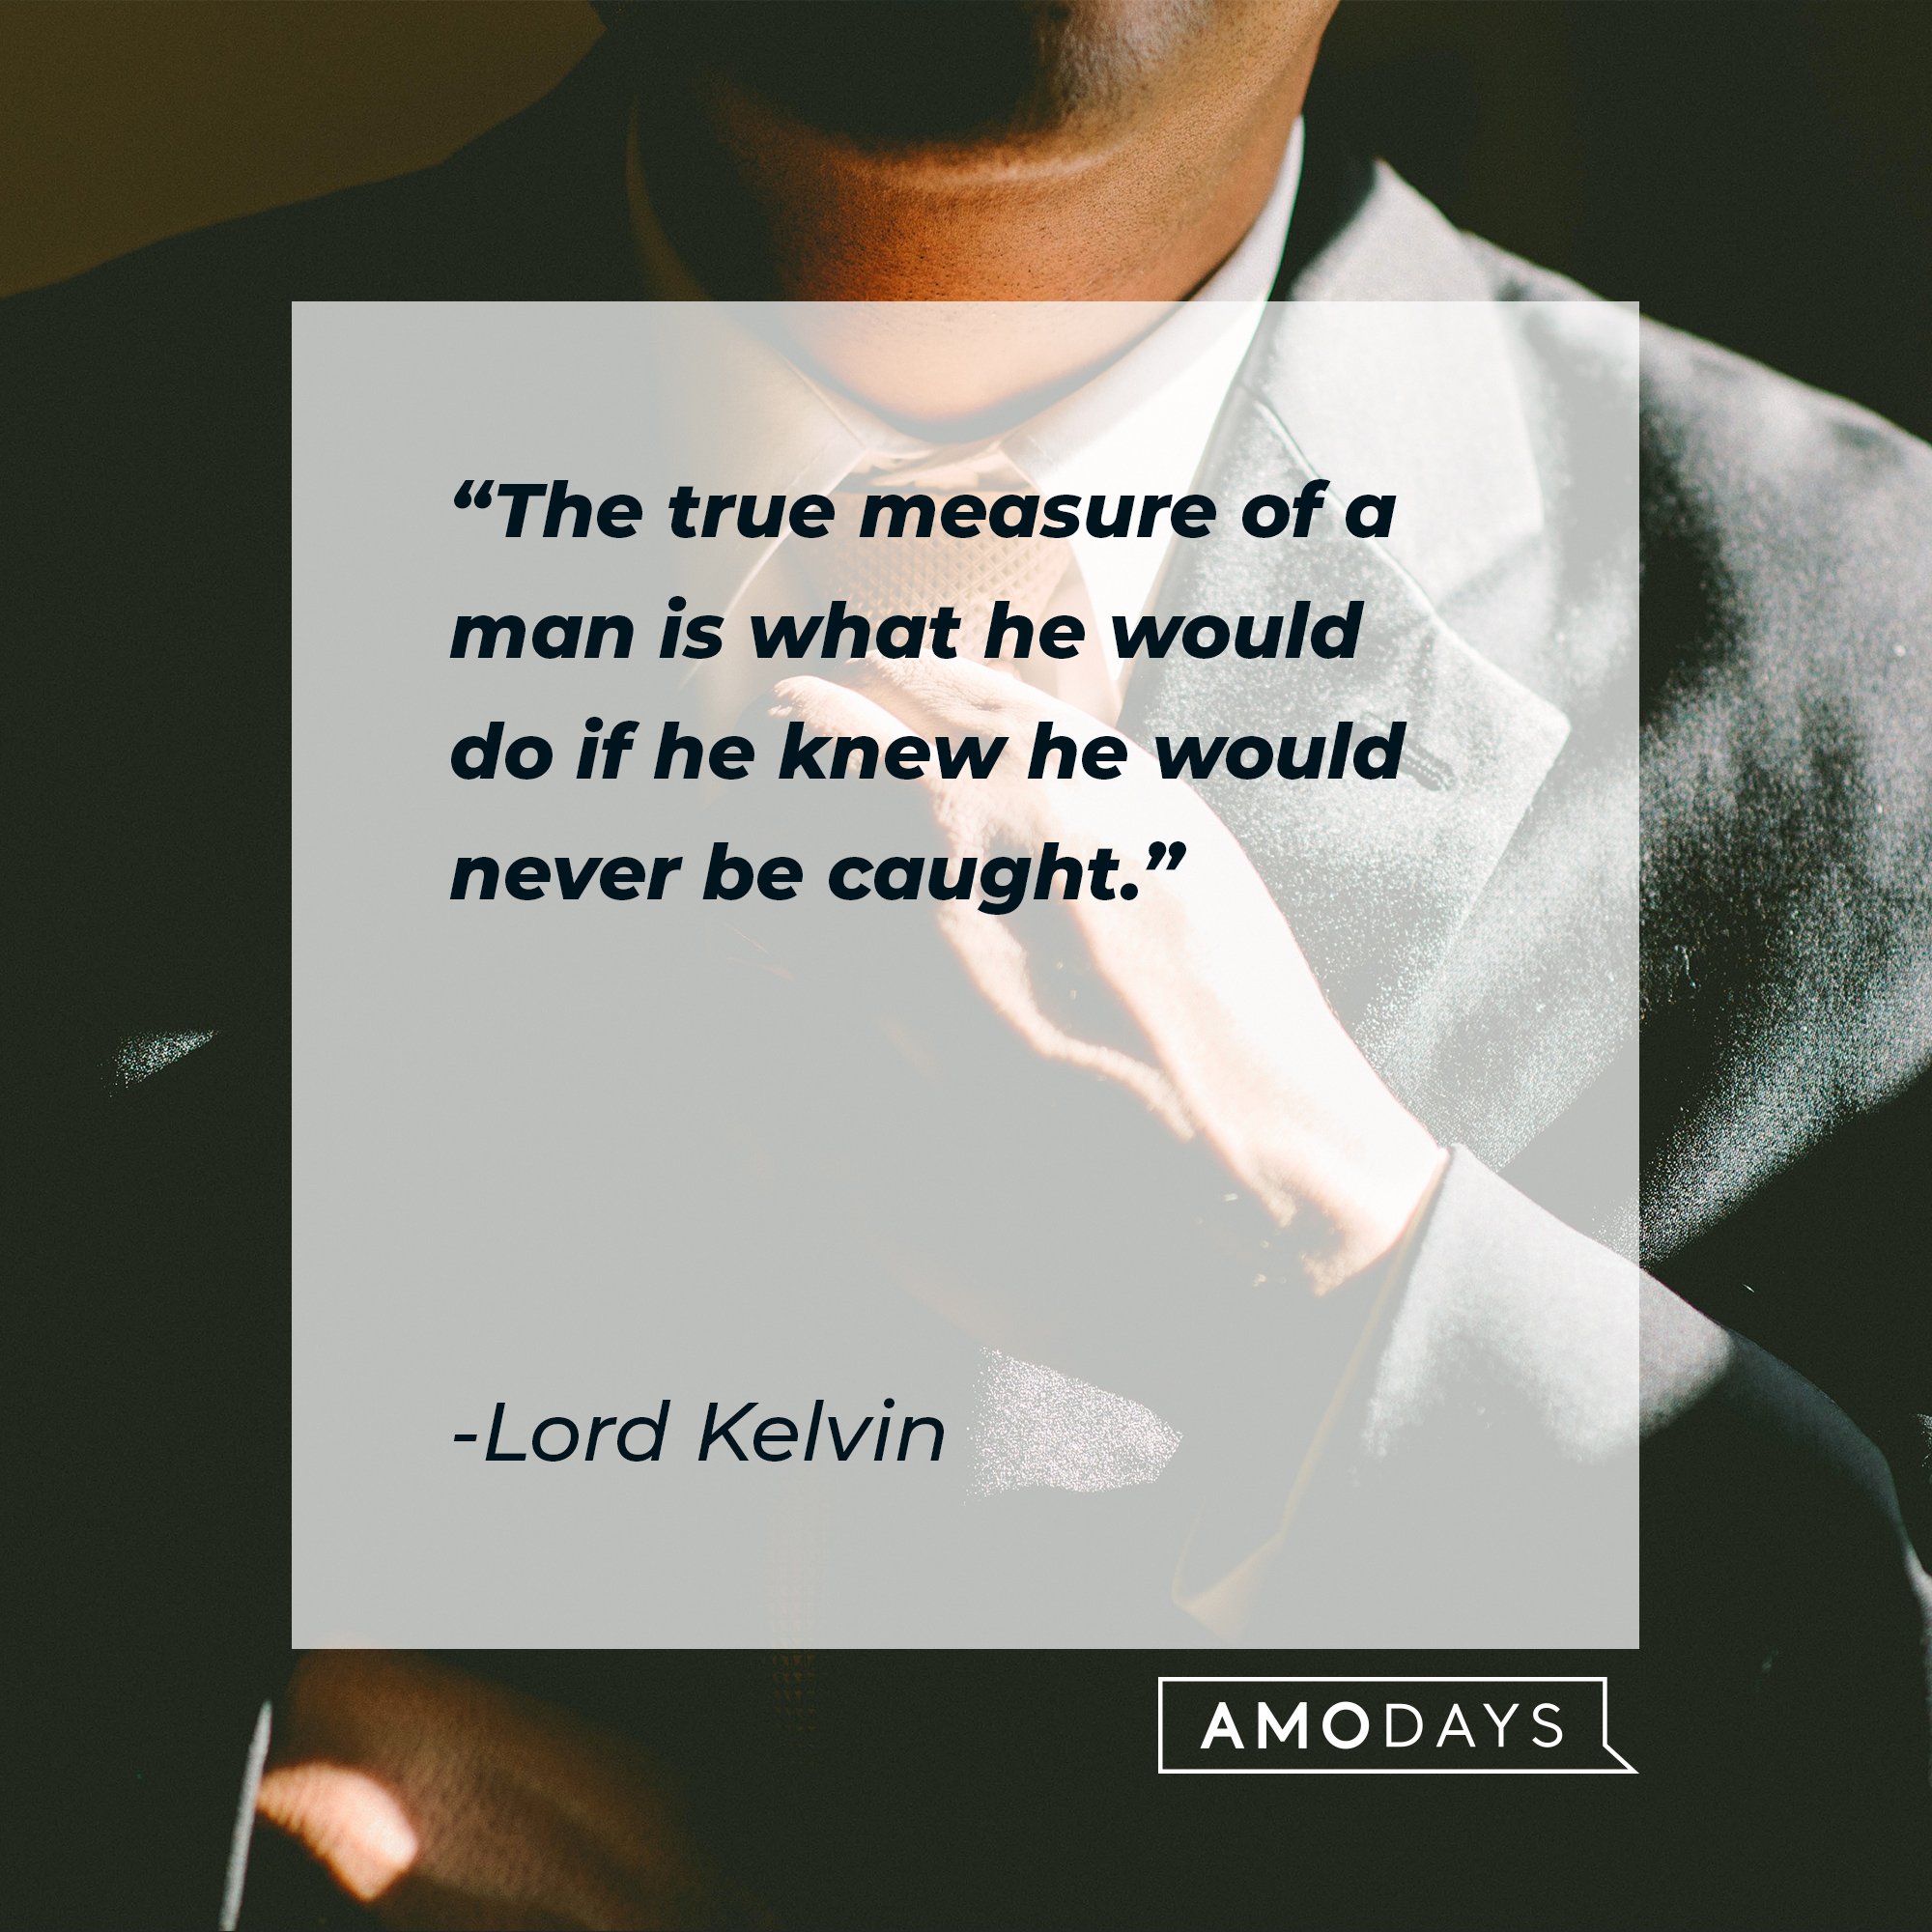  Lord Kelvin’s quote: "The true measure of a man is what he would do if he knew he would never be caught." | Image: AmoDays